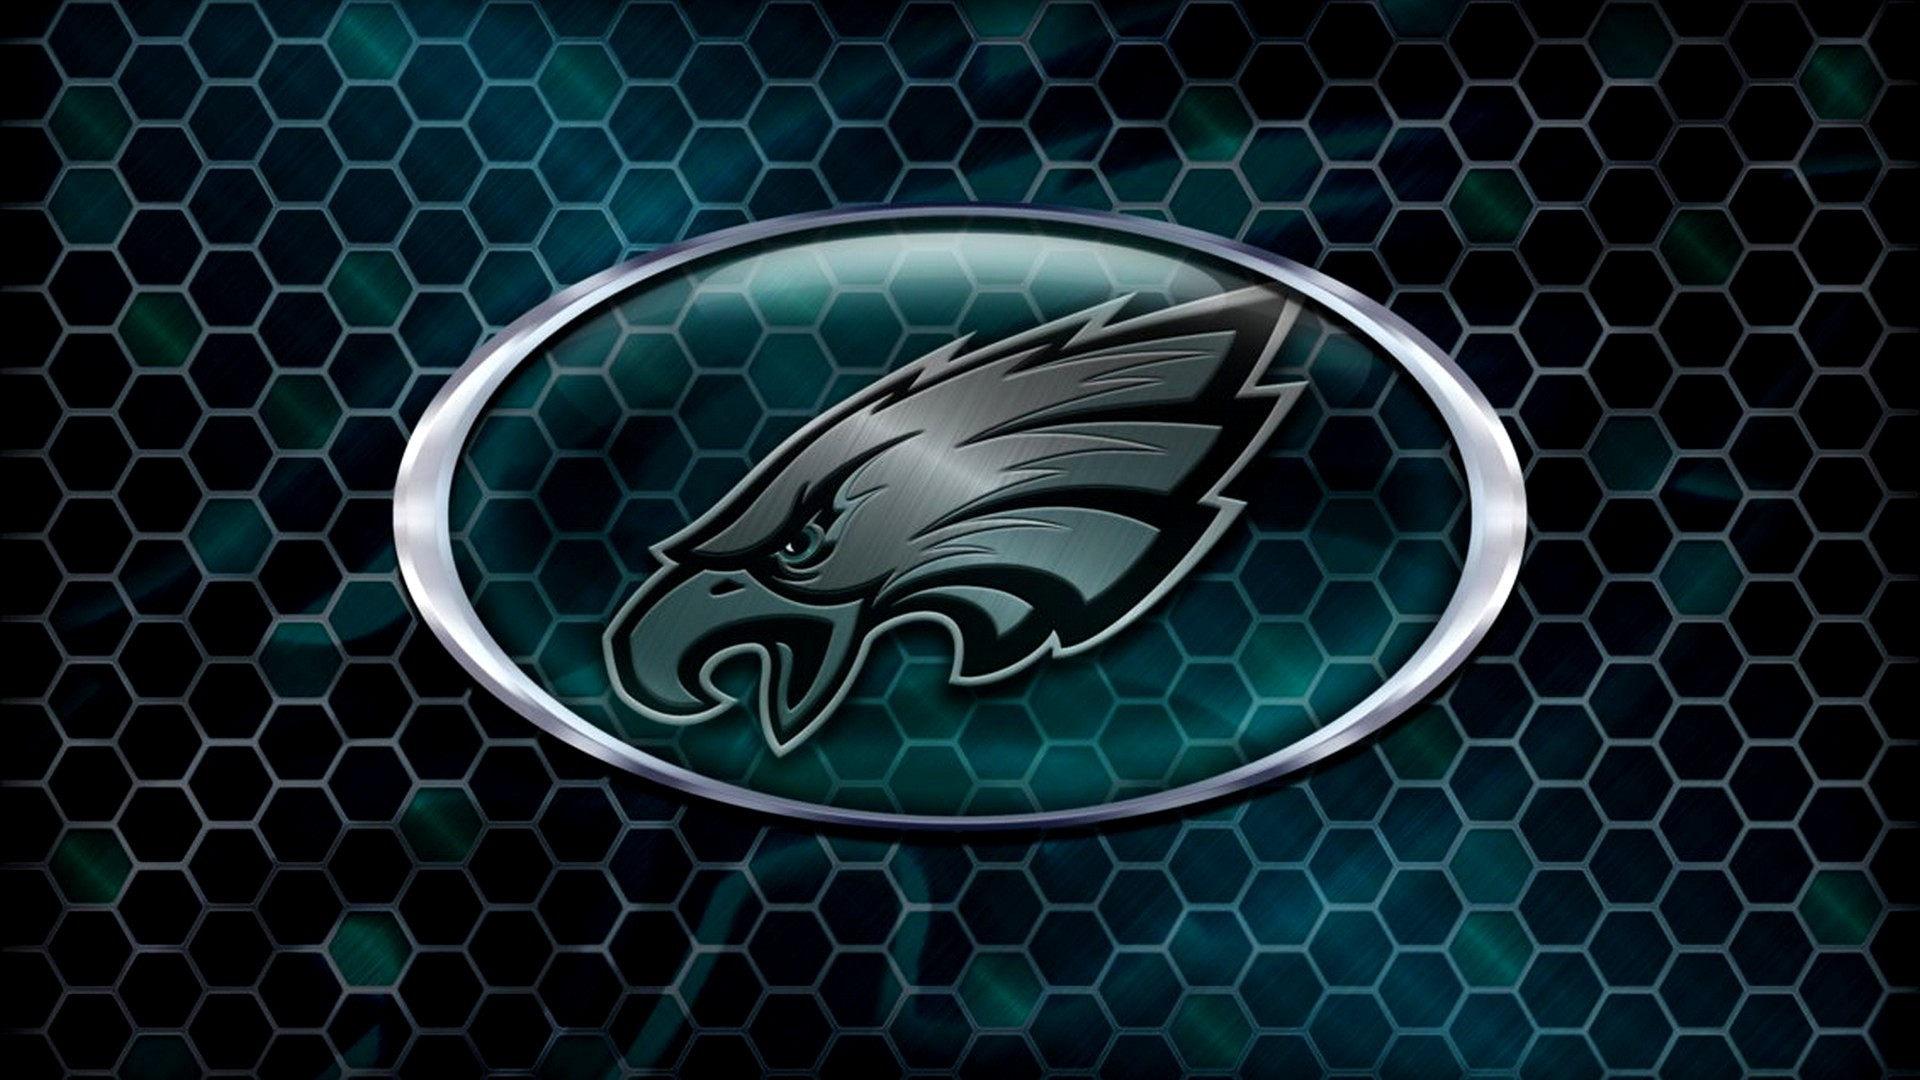 Philadelphia Eagles NFL Wallpaper HD Laptop with high-resolution 1920x1080 pixel. You can use and set as wallpaper for Notebook Screensavers, Mac Wallpapers, Mobile Home Screen, iPhone or Android Phones Lock Screen